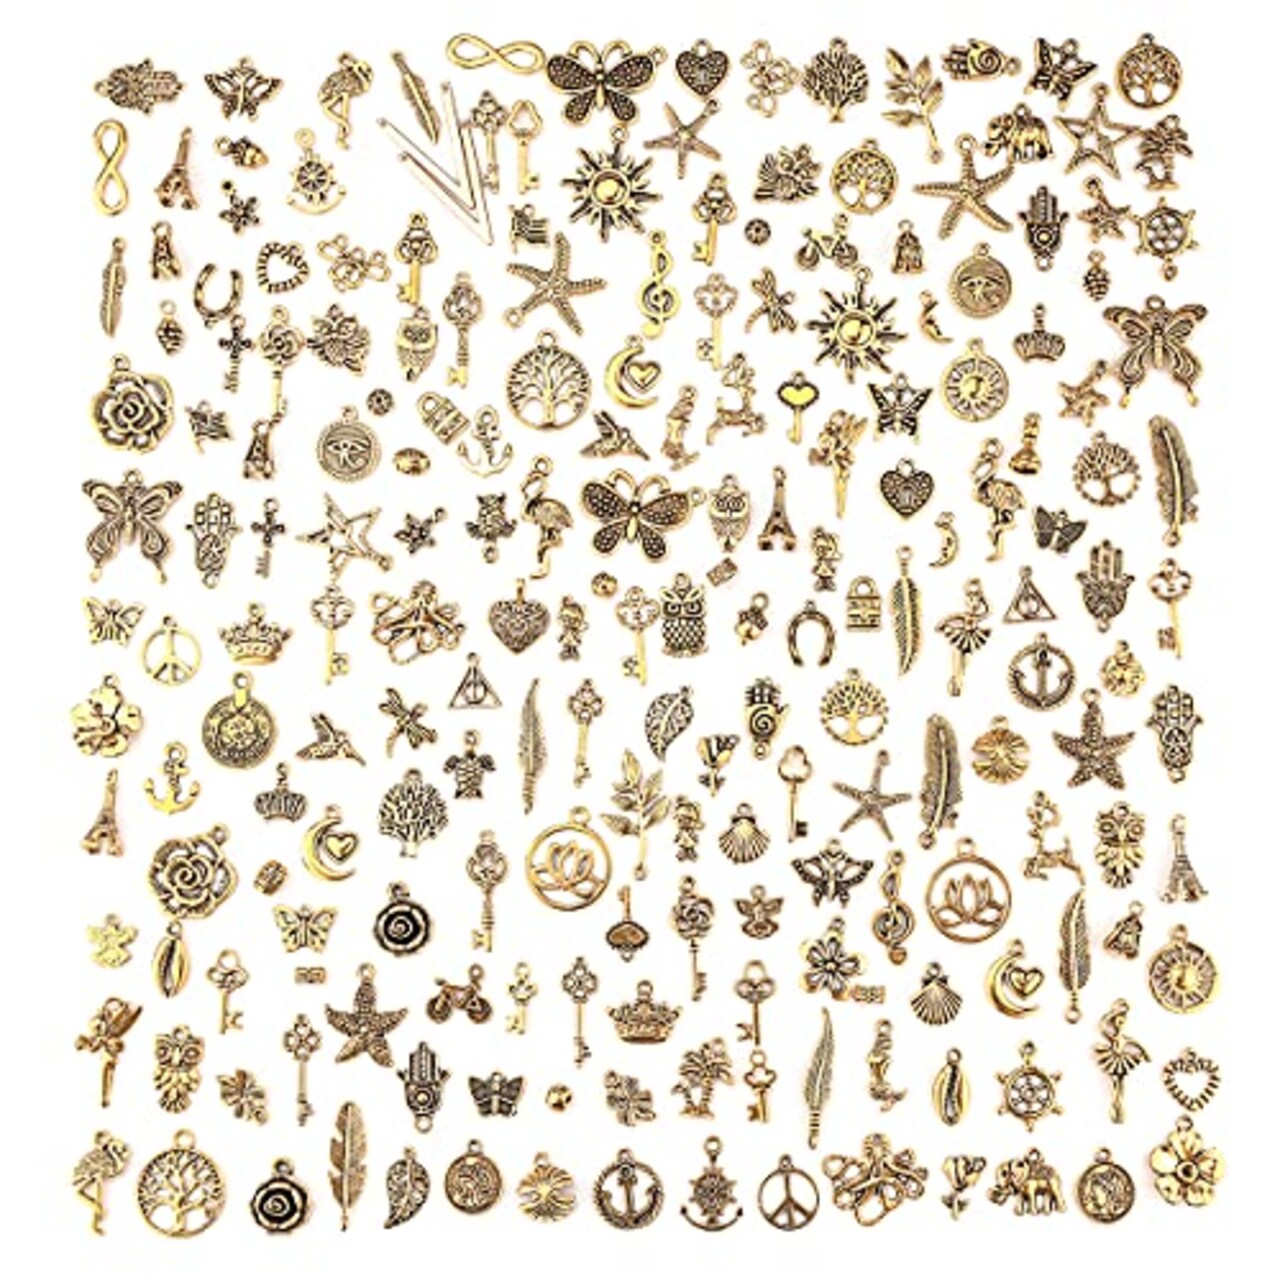 JIALEEY 200Pcs Tibetan Antique Gold Charm Mixed Pendants DIY for Bracelet  Necklace Jewelry Making and Crafting